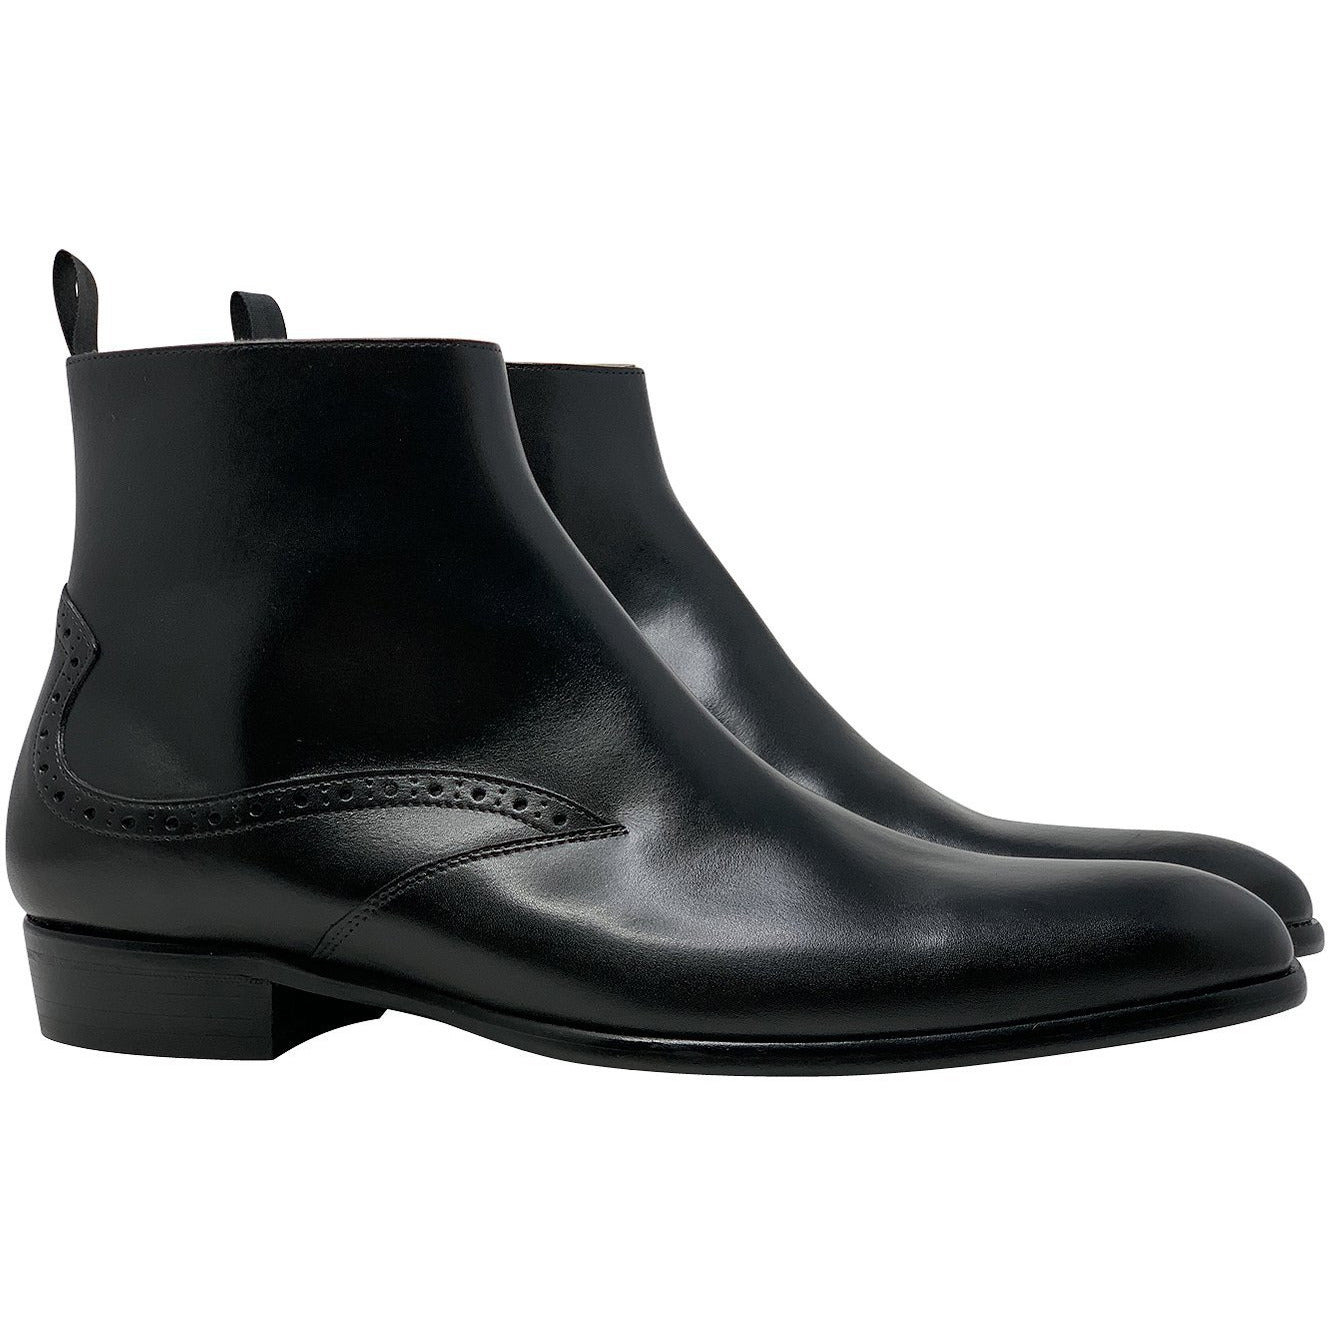 Black Calf Skin Leather Chelsea Boots - The Rico Series – Somiar